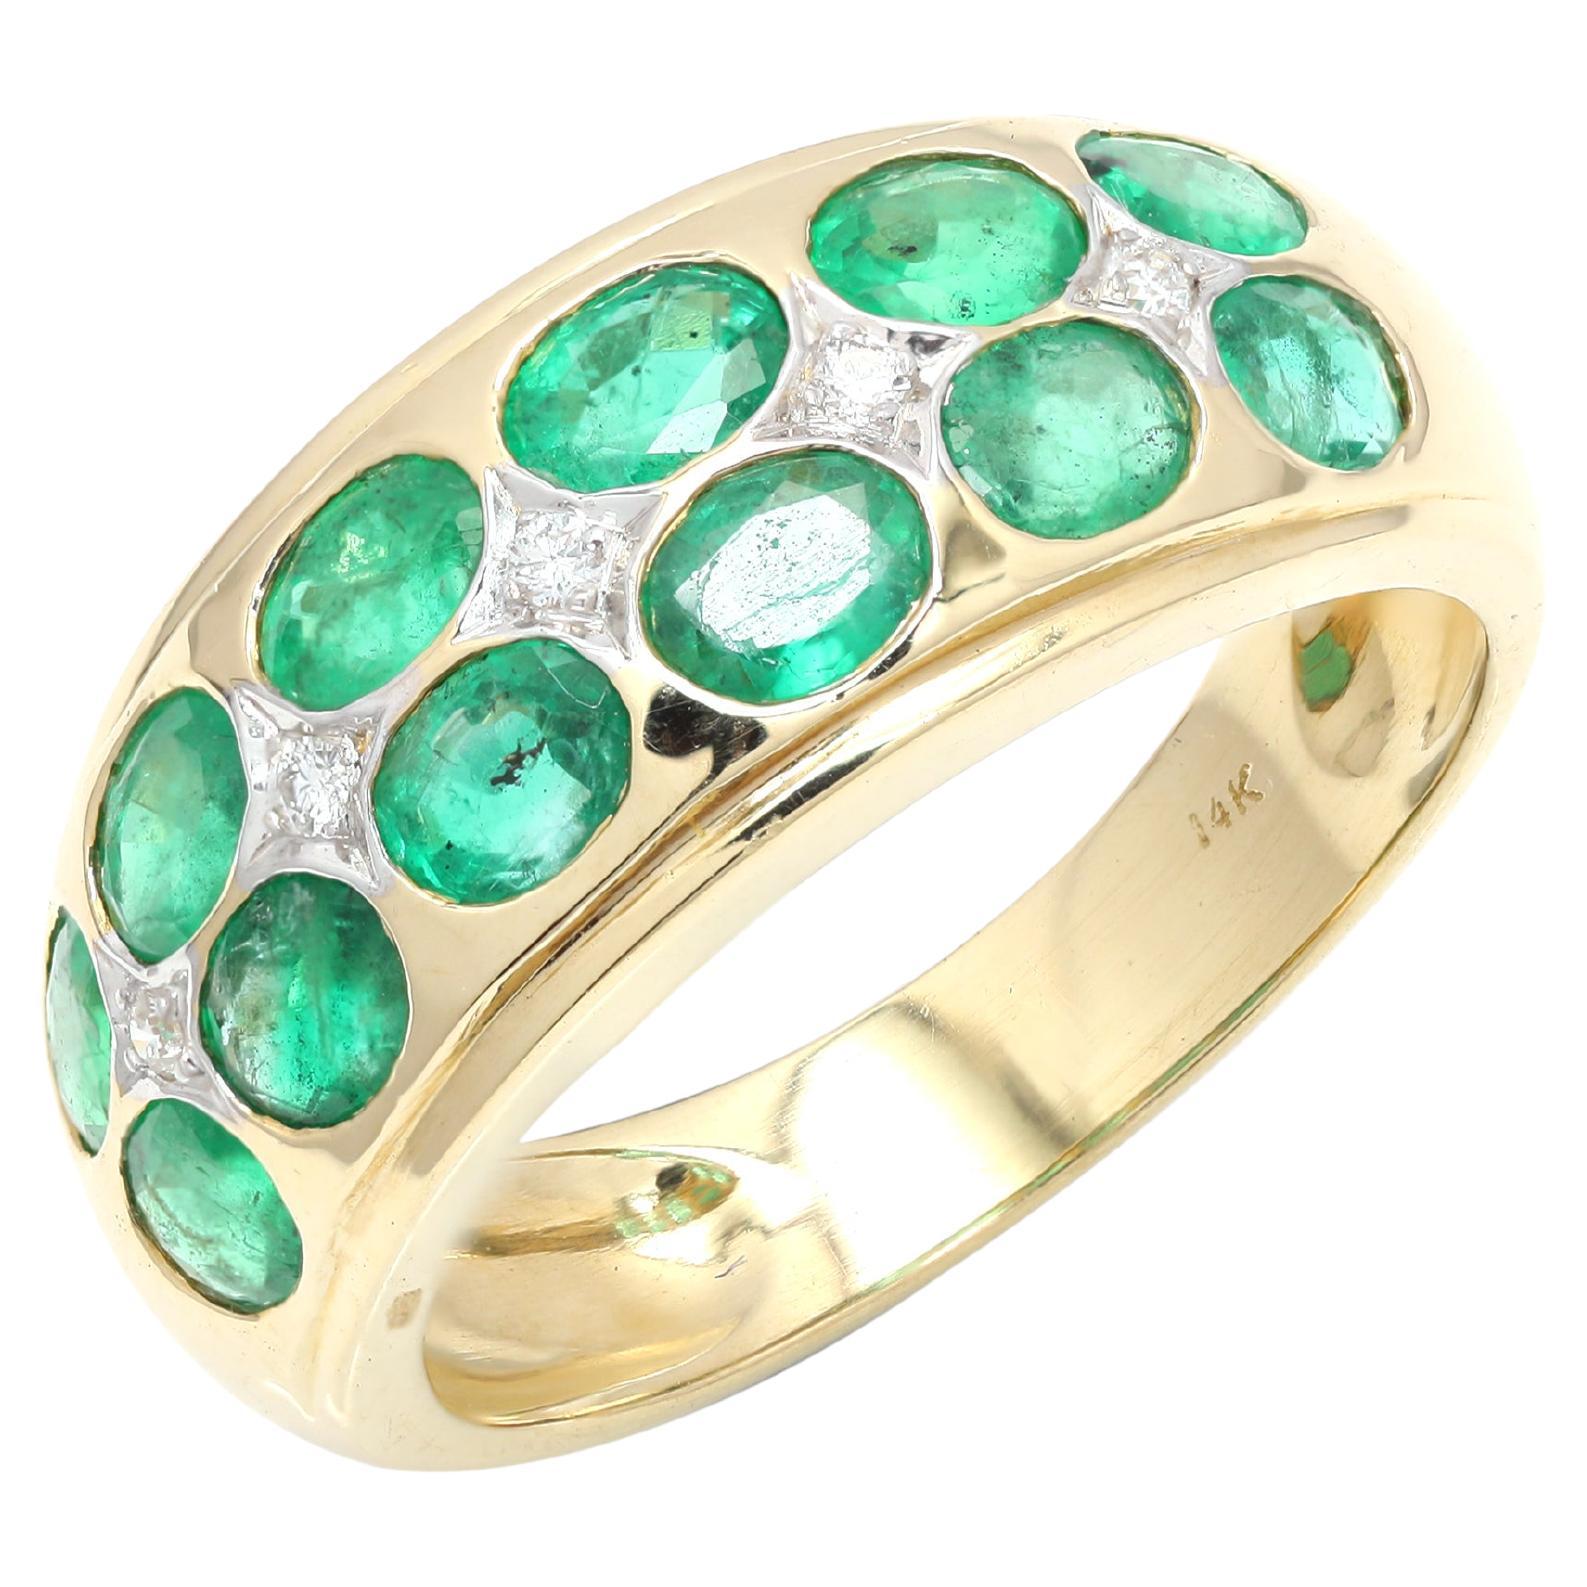 Emerald Diamond Wedding Band Ring for Father in 14k Solid Yellow Gold